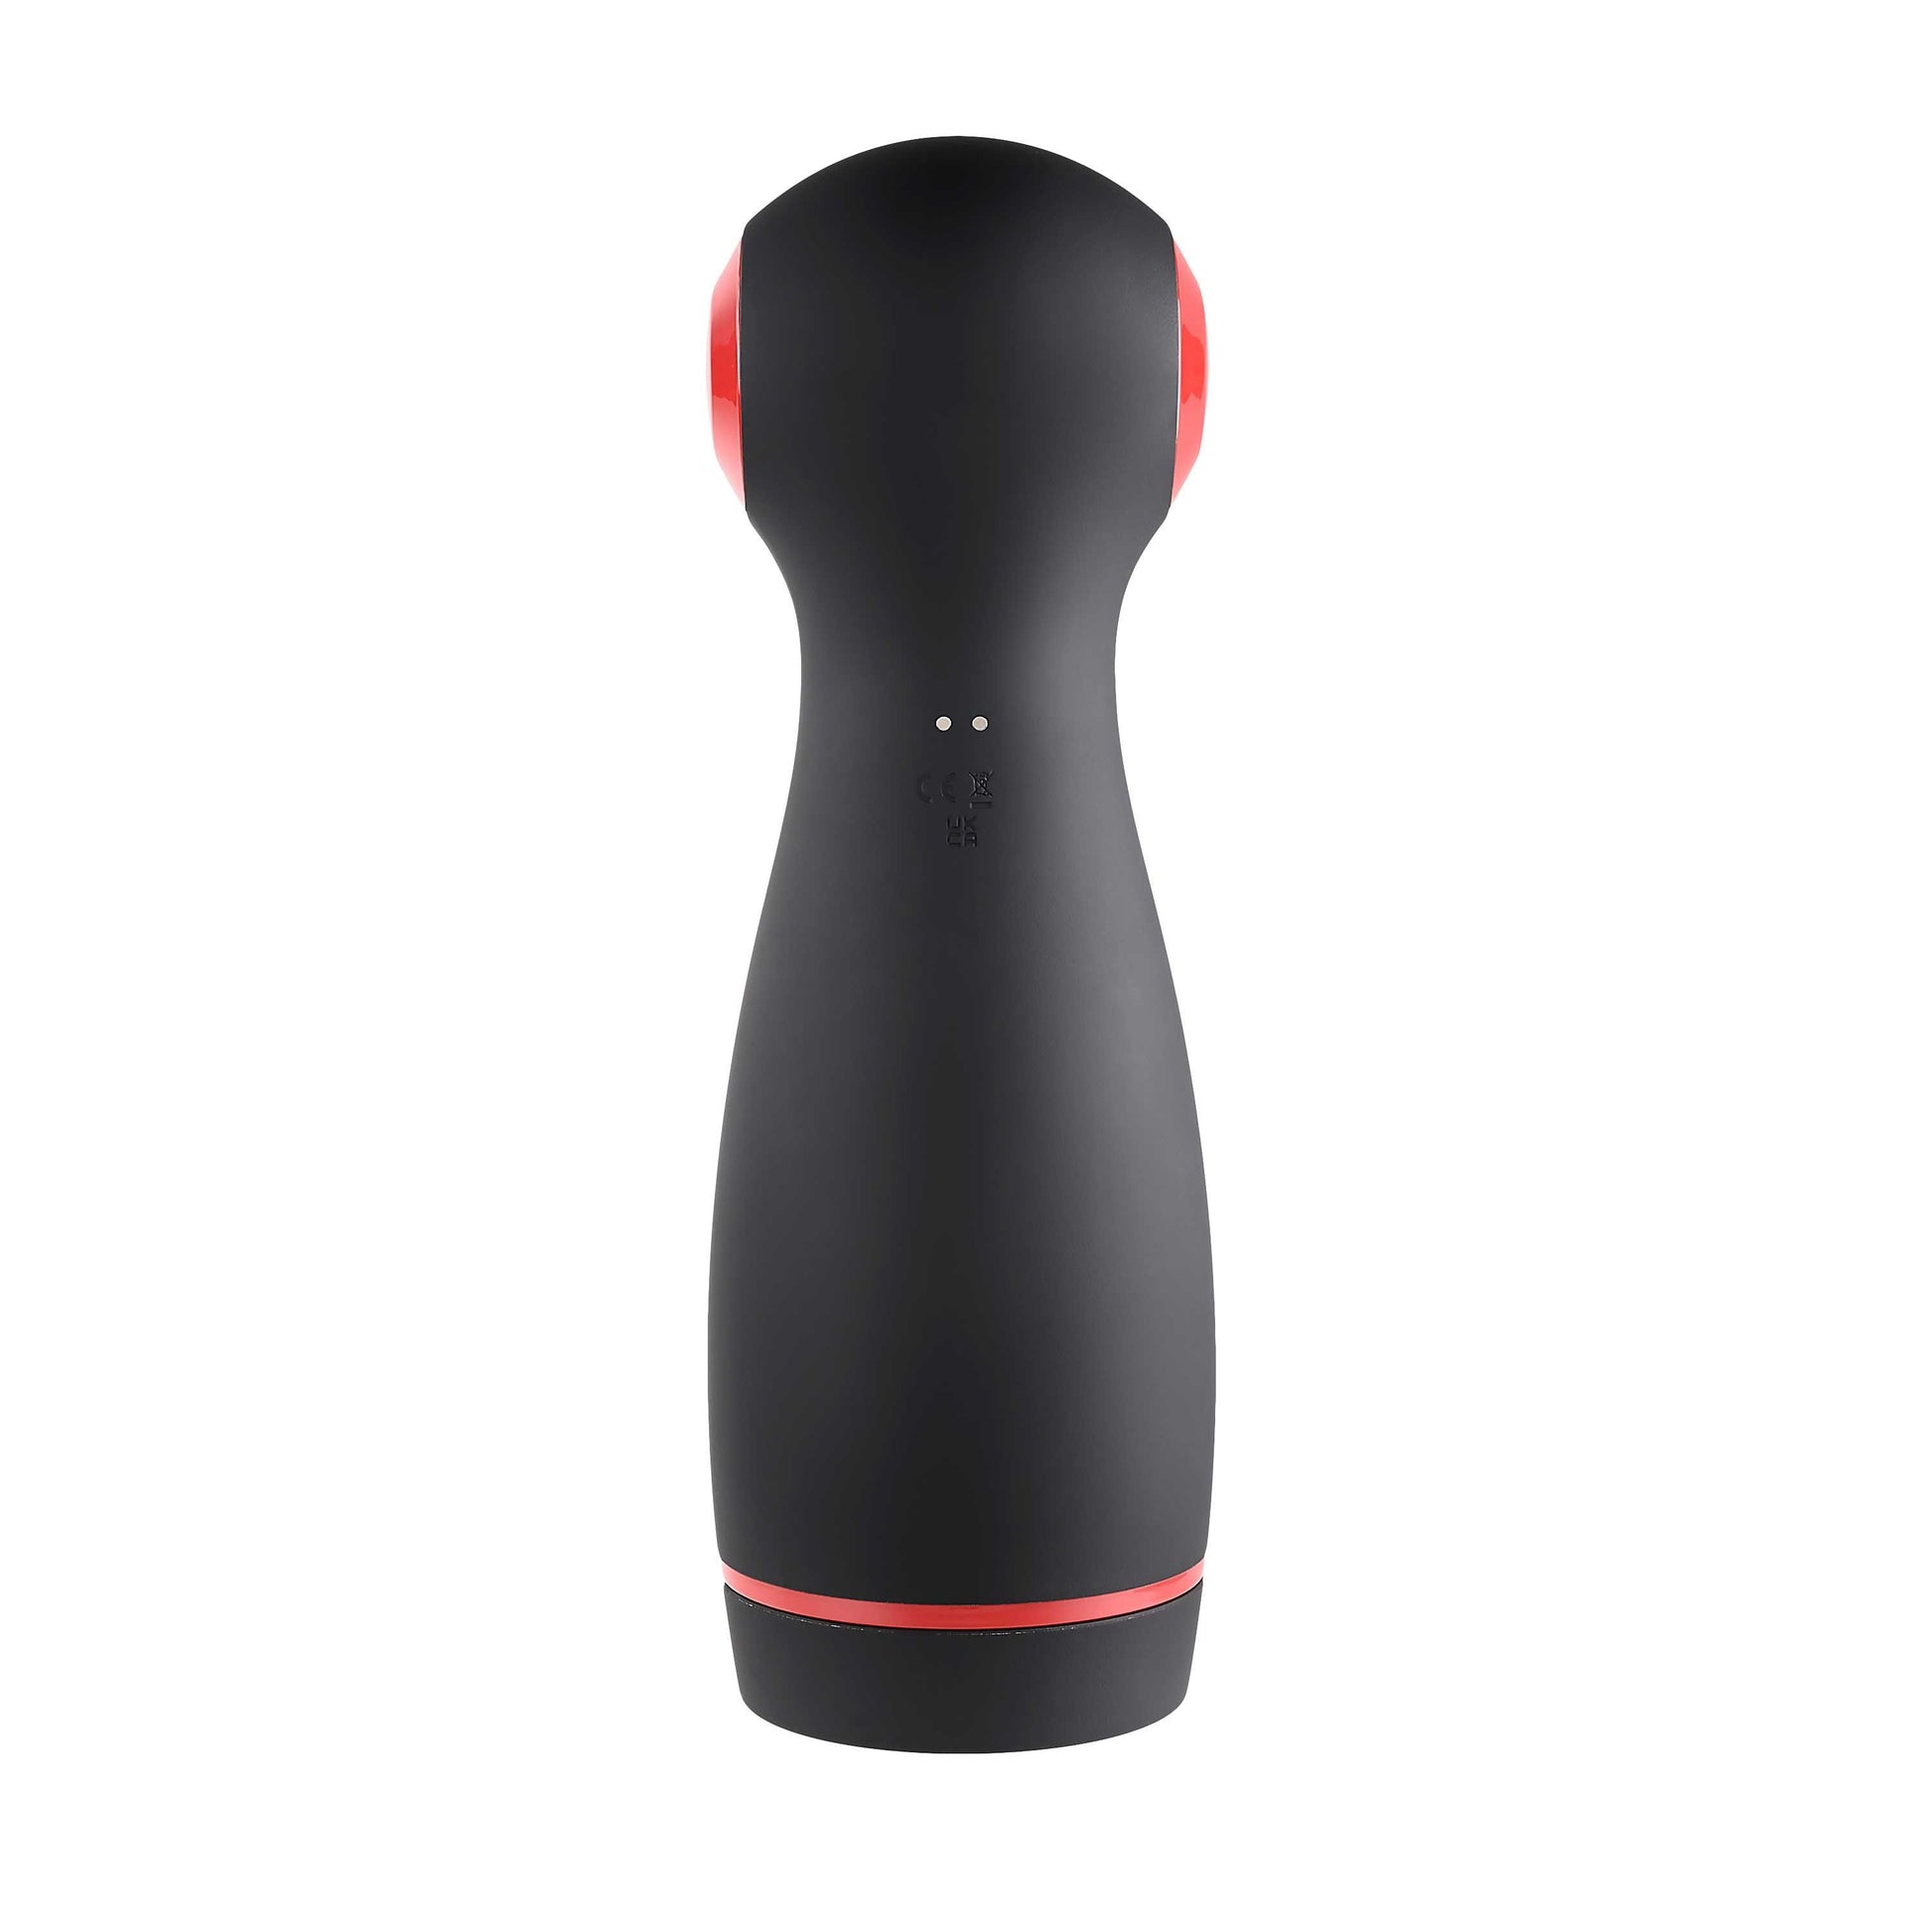 Tight Squeez - Black/red - My Sex Toy Hub